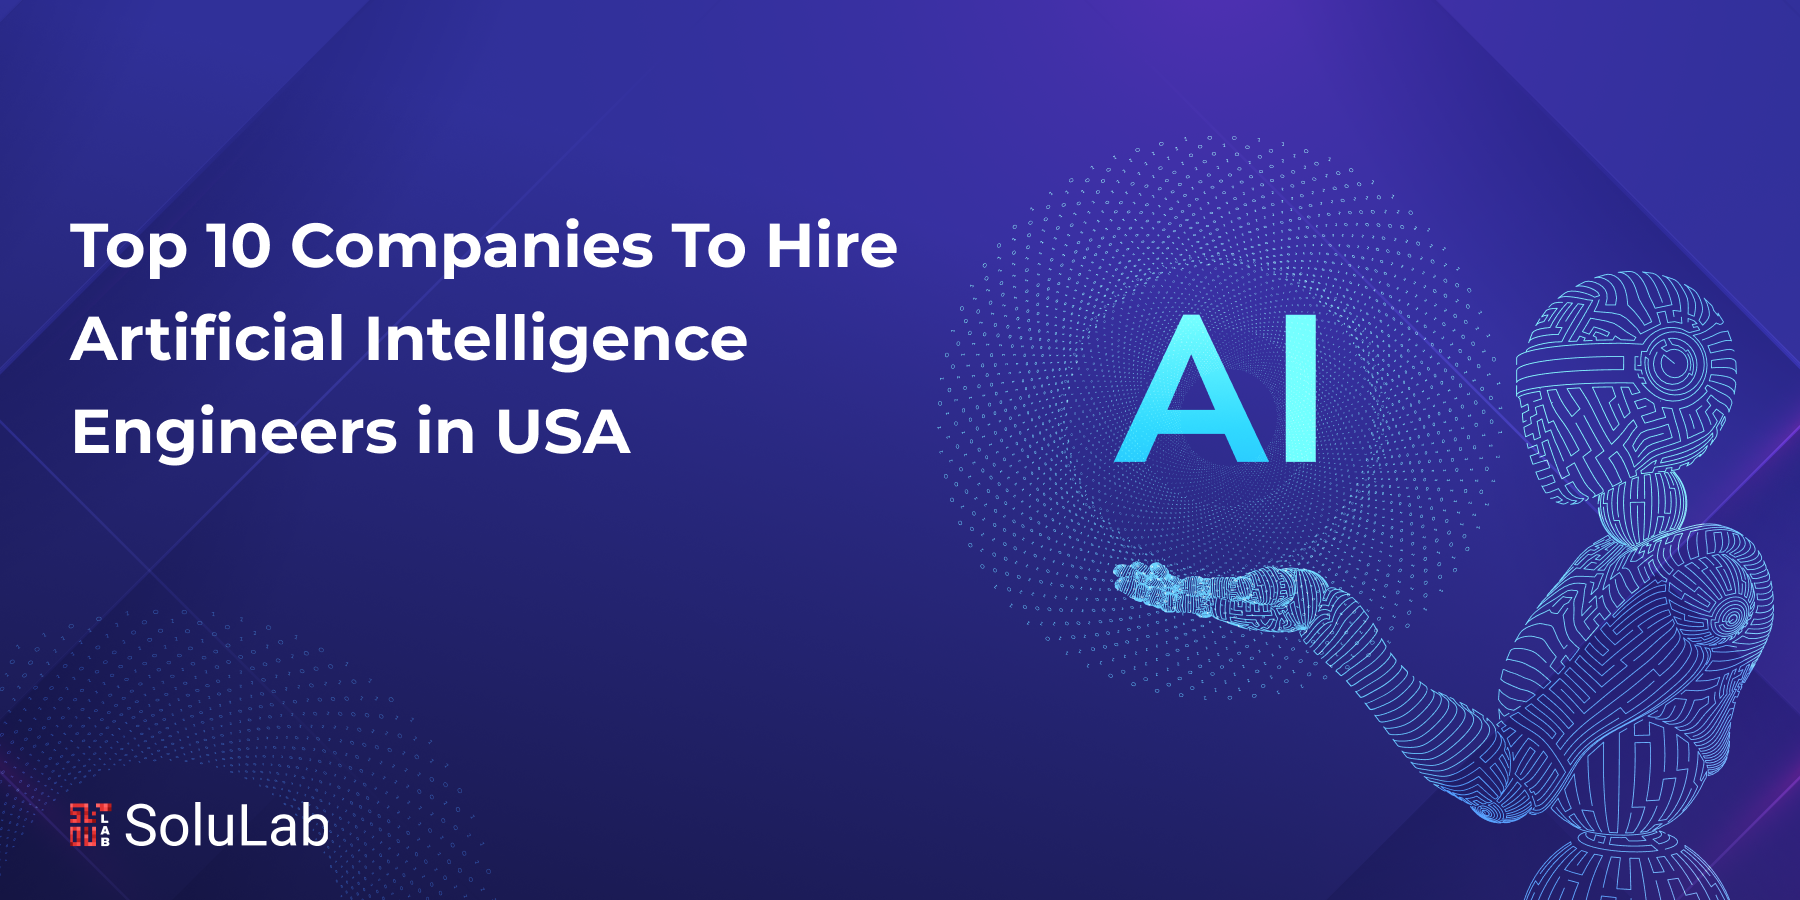 Top 10 Companies To Hire Artificial Intelligence Engineers in USA